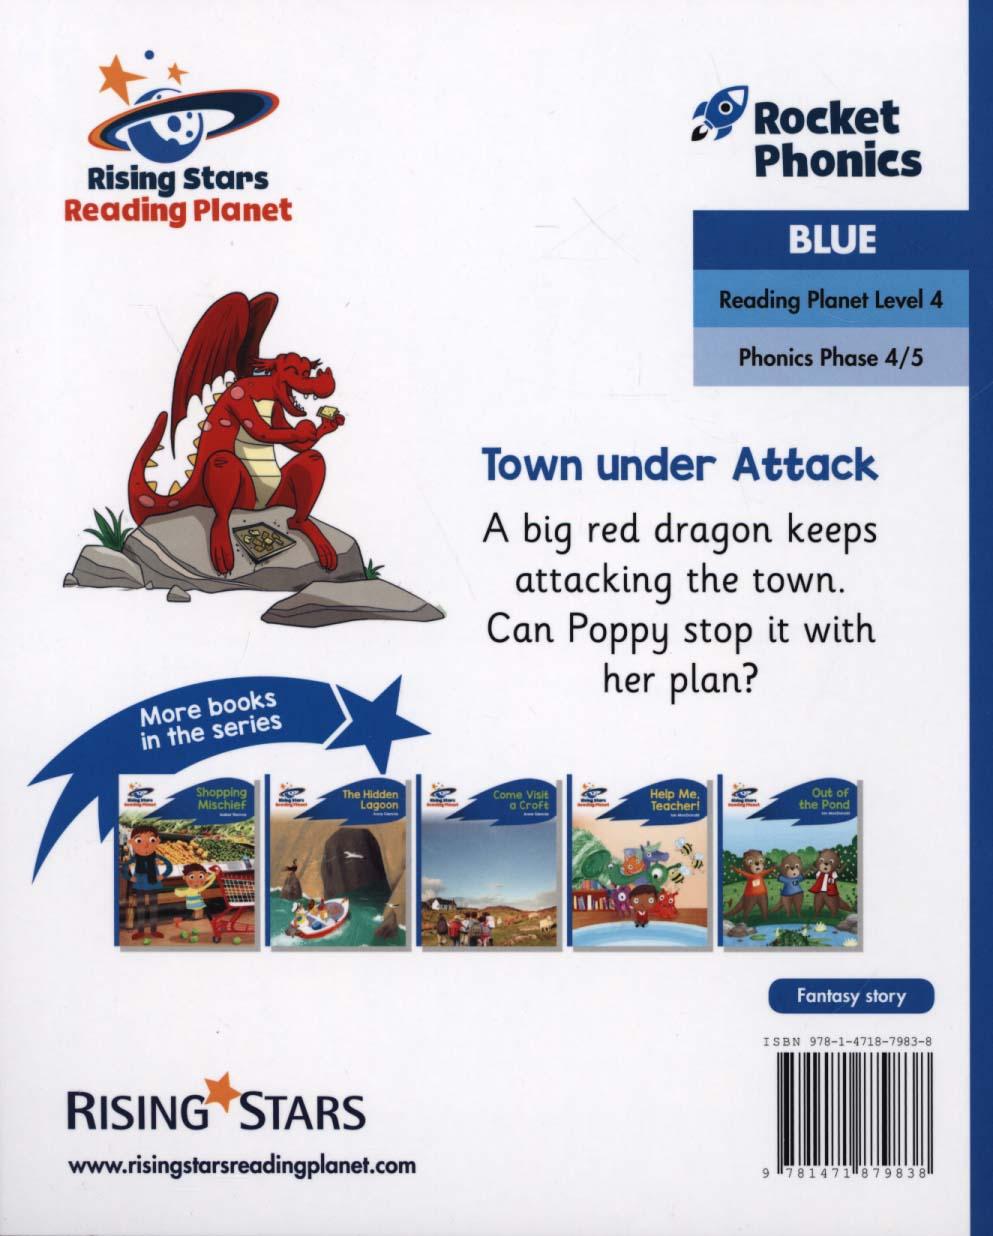 Reading Planet - Town Under Attack - Blue: Rocket Phonics